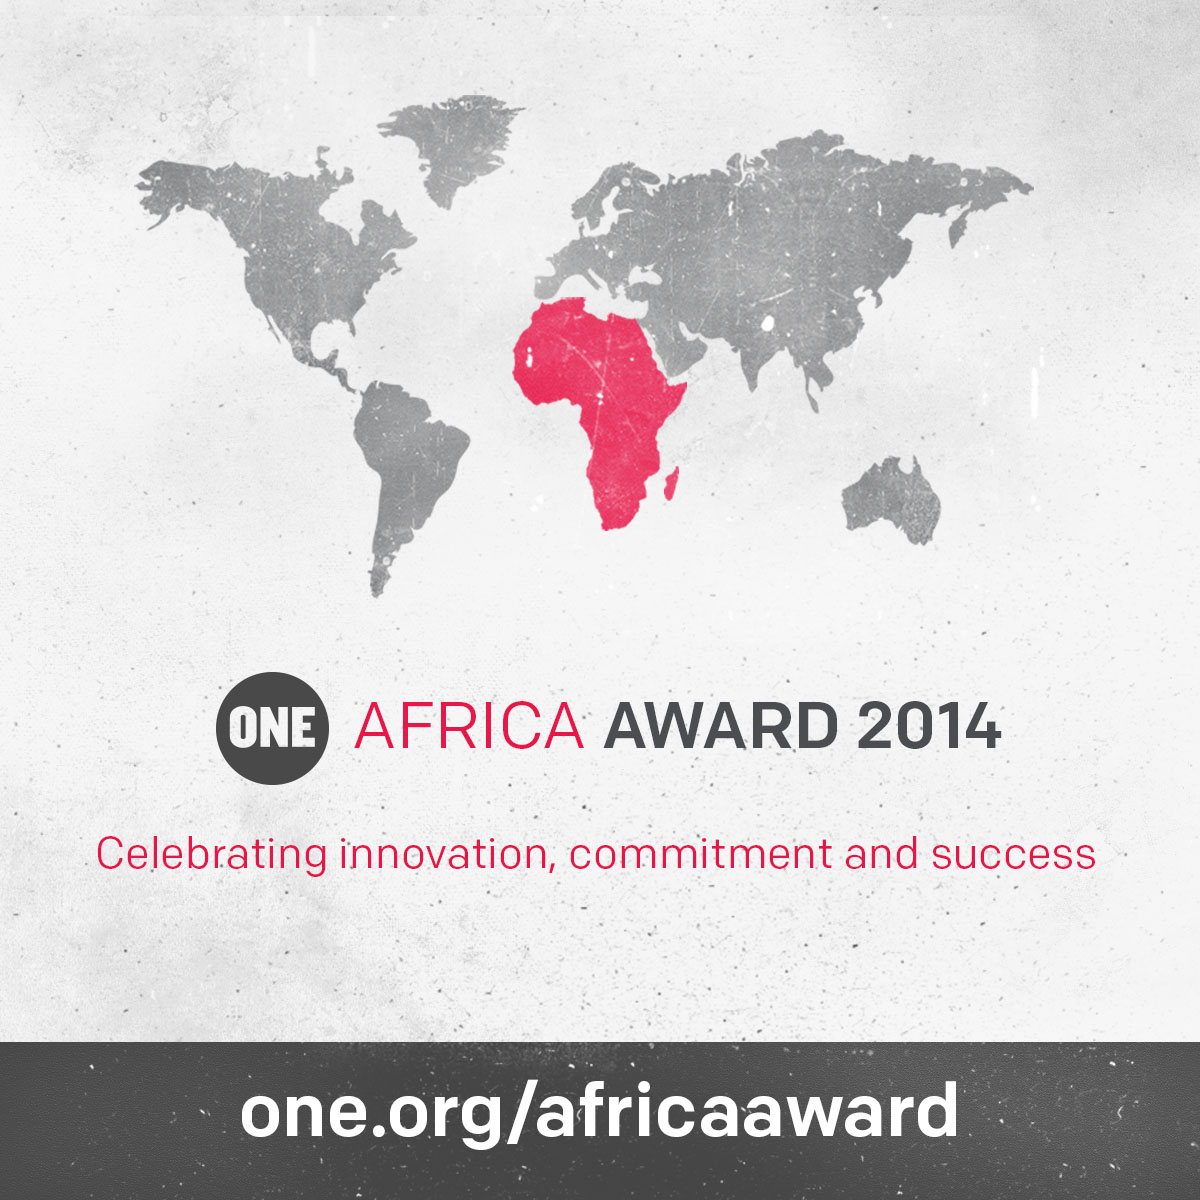 Announcing the 2014 ONE Africa Award!